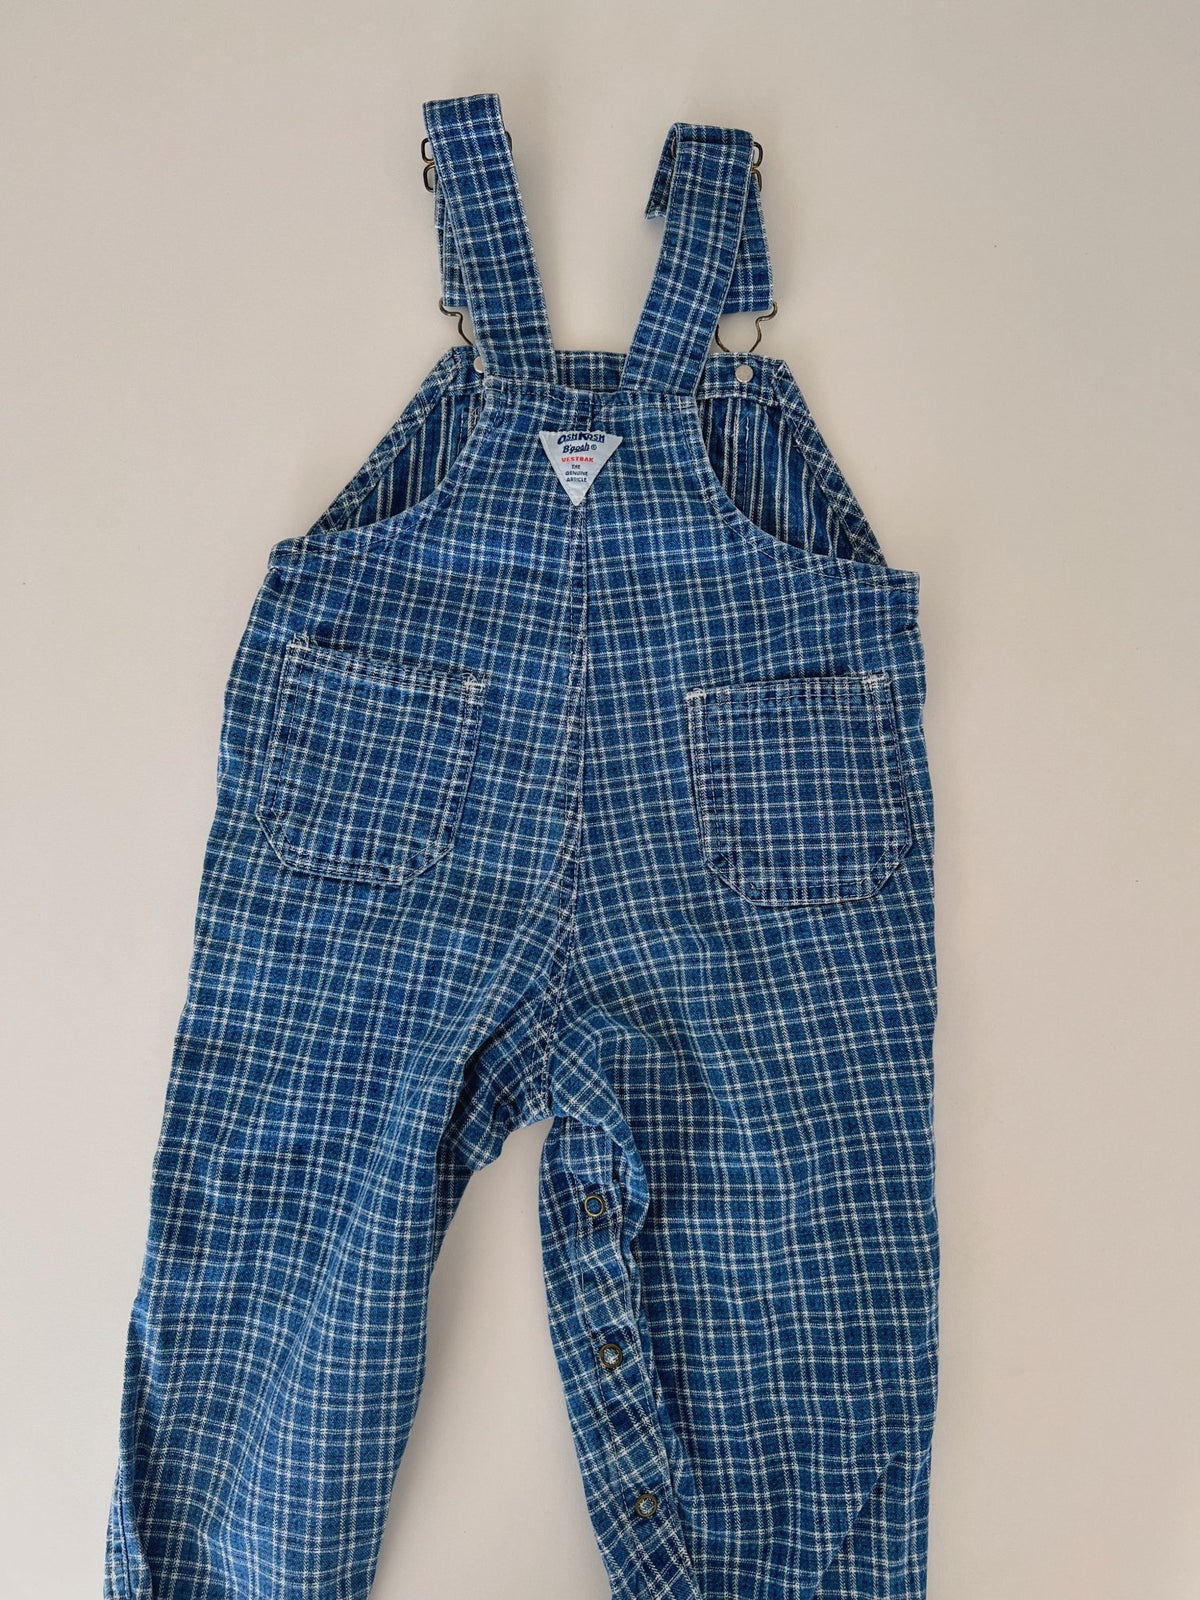 Oshkosh overall pre loved 3t - Marlow and Mae